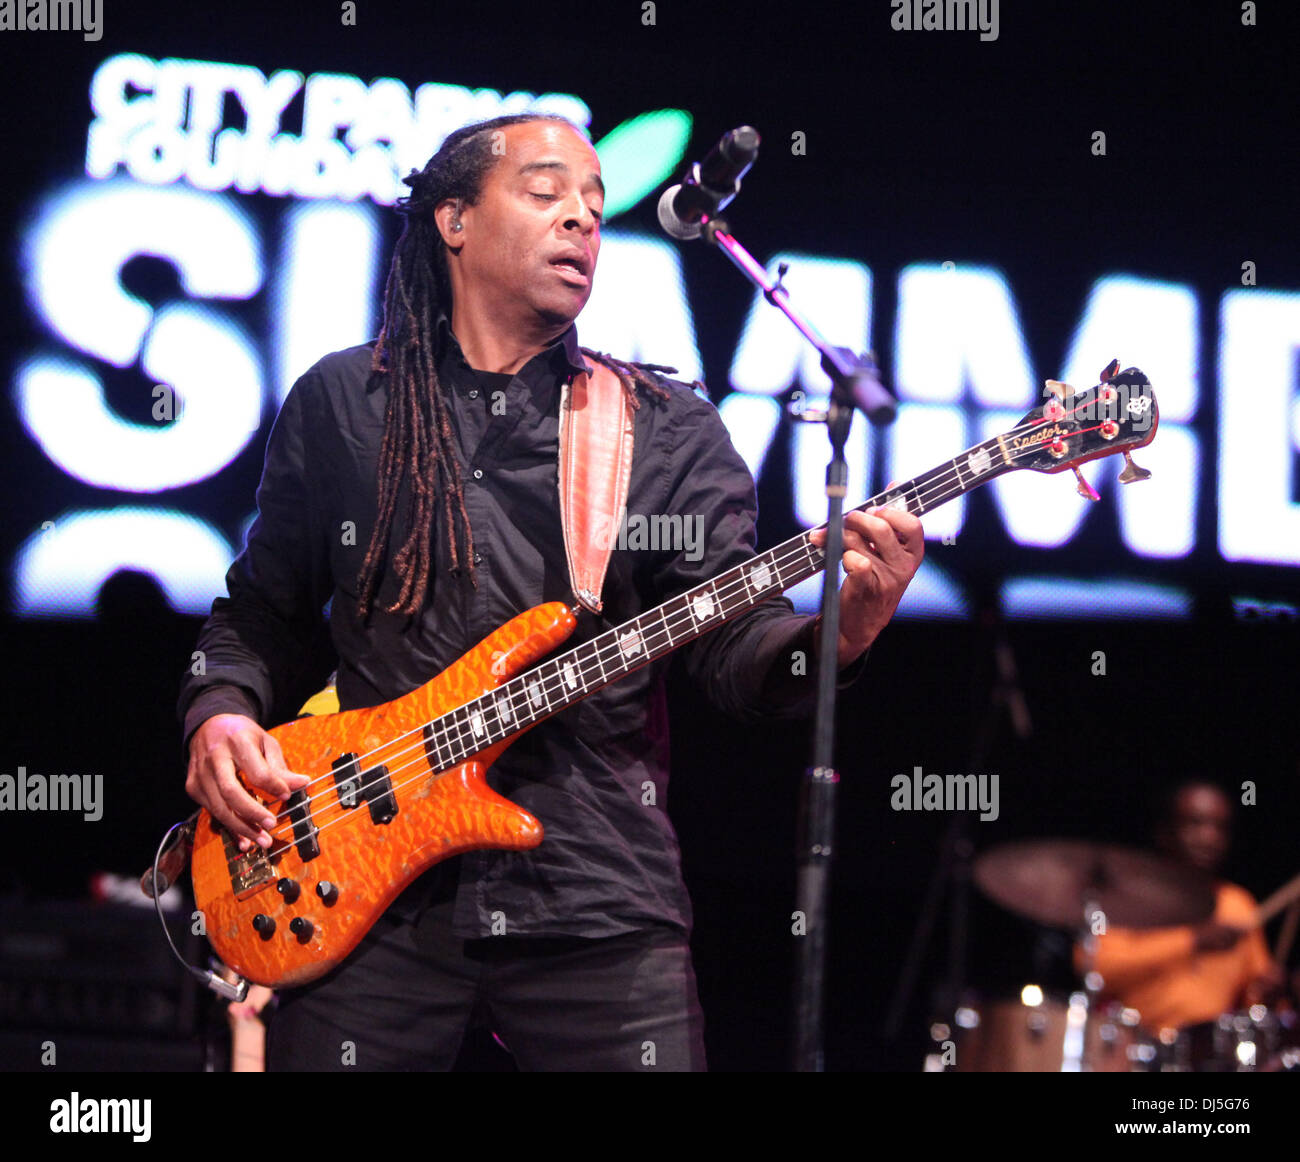 Doug Wimbish 2012 City Parks Foundation Summerstage Gala - 'The Music of Jimi Hendrix' - at Rumsey Playfield, Central Park New York City, USA - 05.06.12 Stock Photo